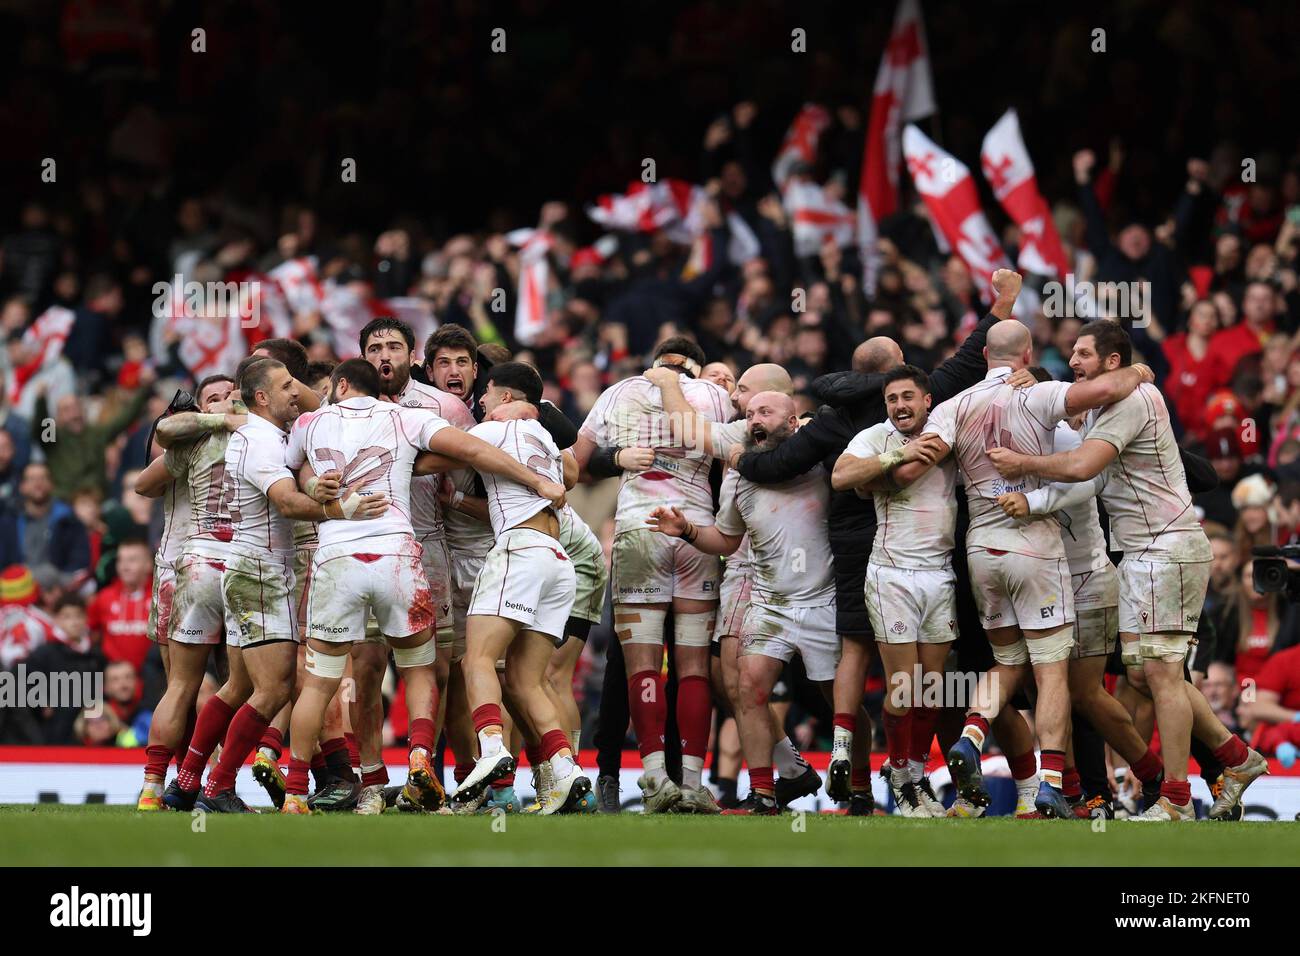 Cardiff, UK. 19th Nov, 2022. Georgia players celebrate their teams win at the final whistle after winning the match 12-13. Autumn nations series 2022 rugby match, Wales v Georgia at the Principality Stadium in Cardiff on Saturday 19th November 2022. pic by Andrew Orchard/Andrew Orchard sports photography/Alamy Live News Credit: Andrew Orchard sports photography/Alamy Live News Stock Photo